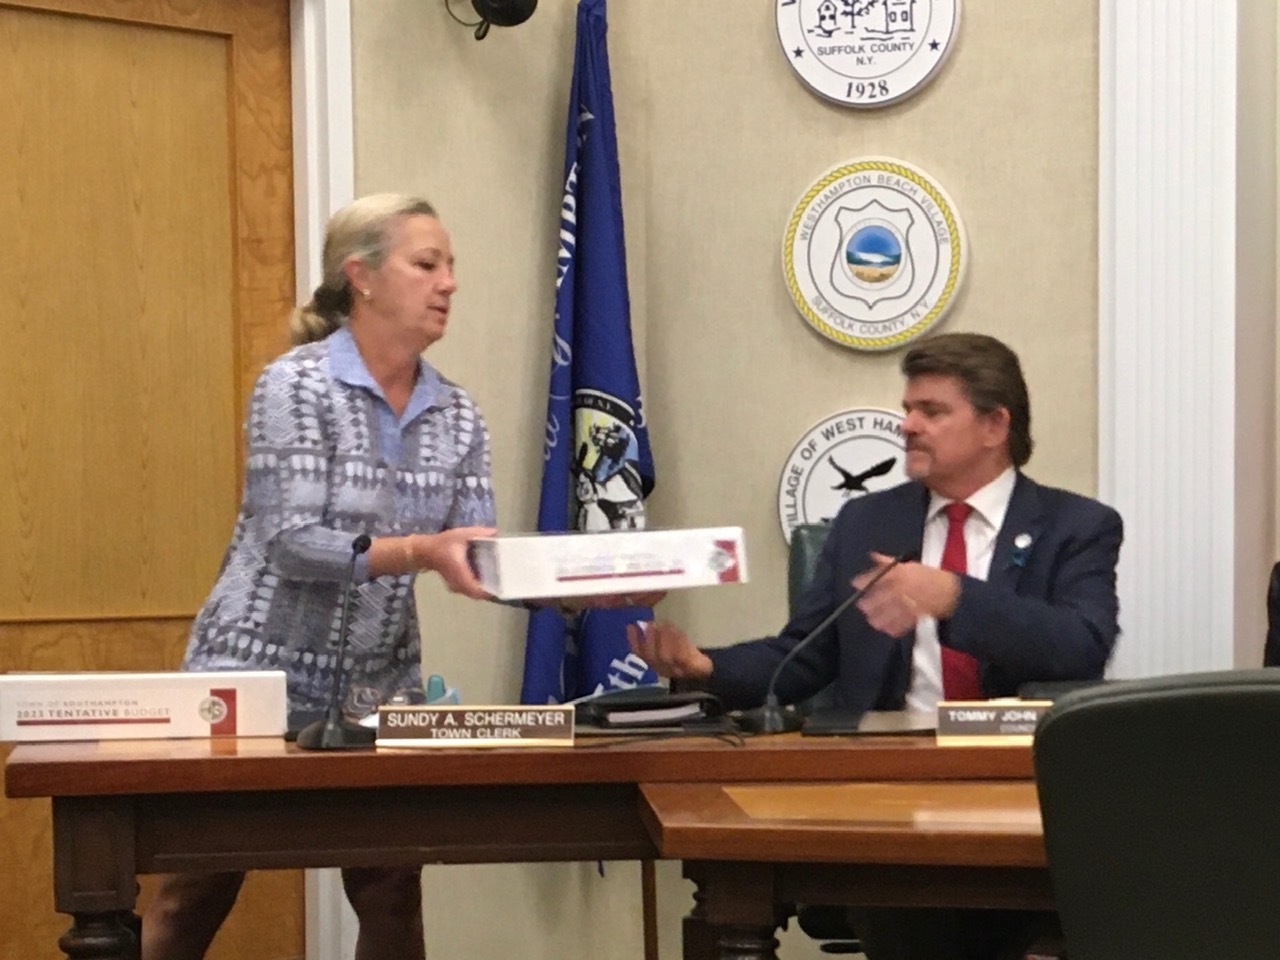 Southampton Town Clerk Sundy Schermeyer distributed  the tentative budget to members of the Town Board. Above Councilman Tommy John Schiavoni accepts the hefty tome.     KITTY MERRILL